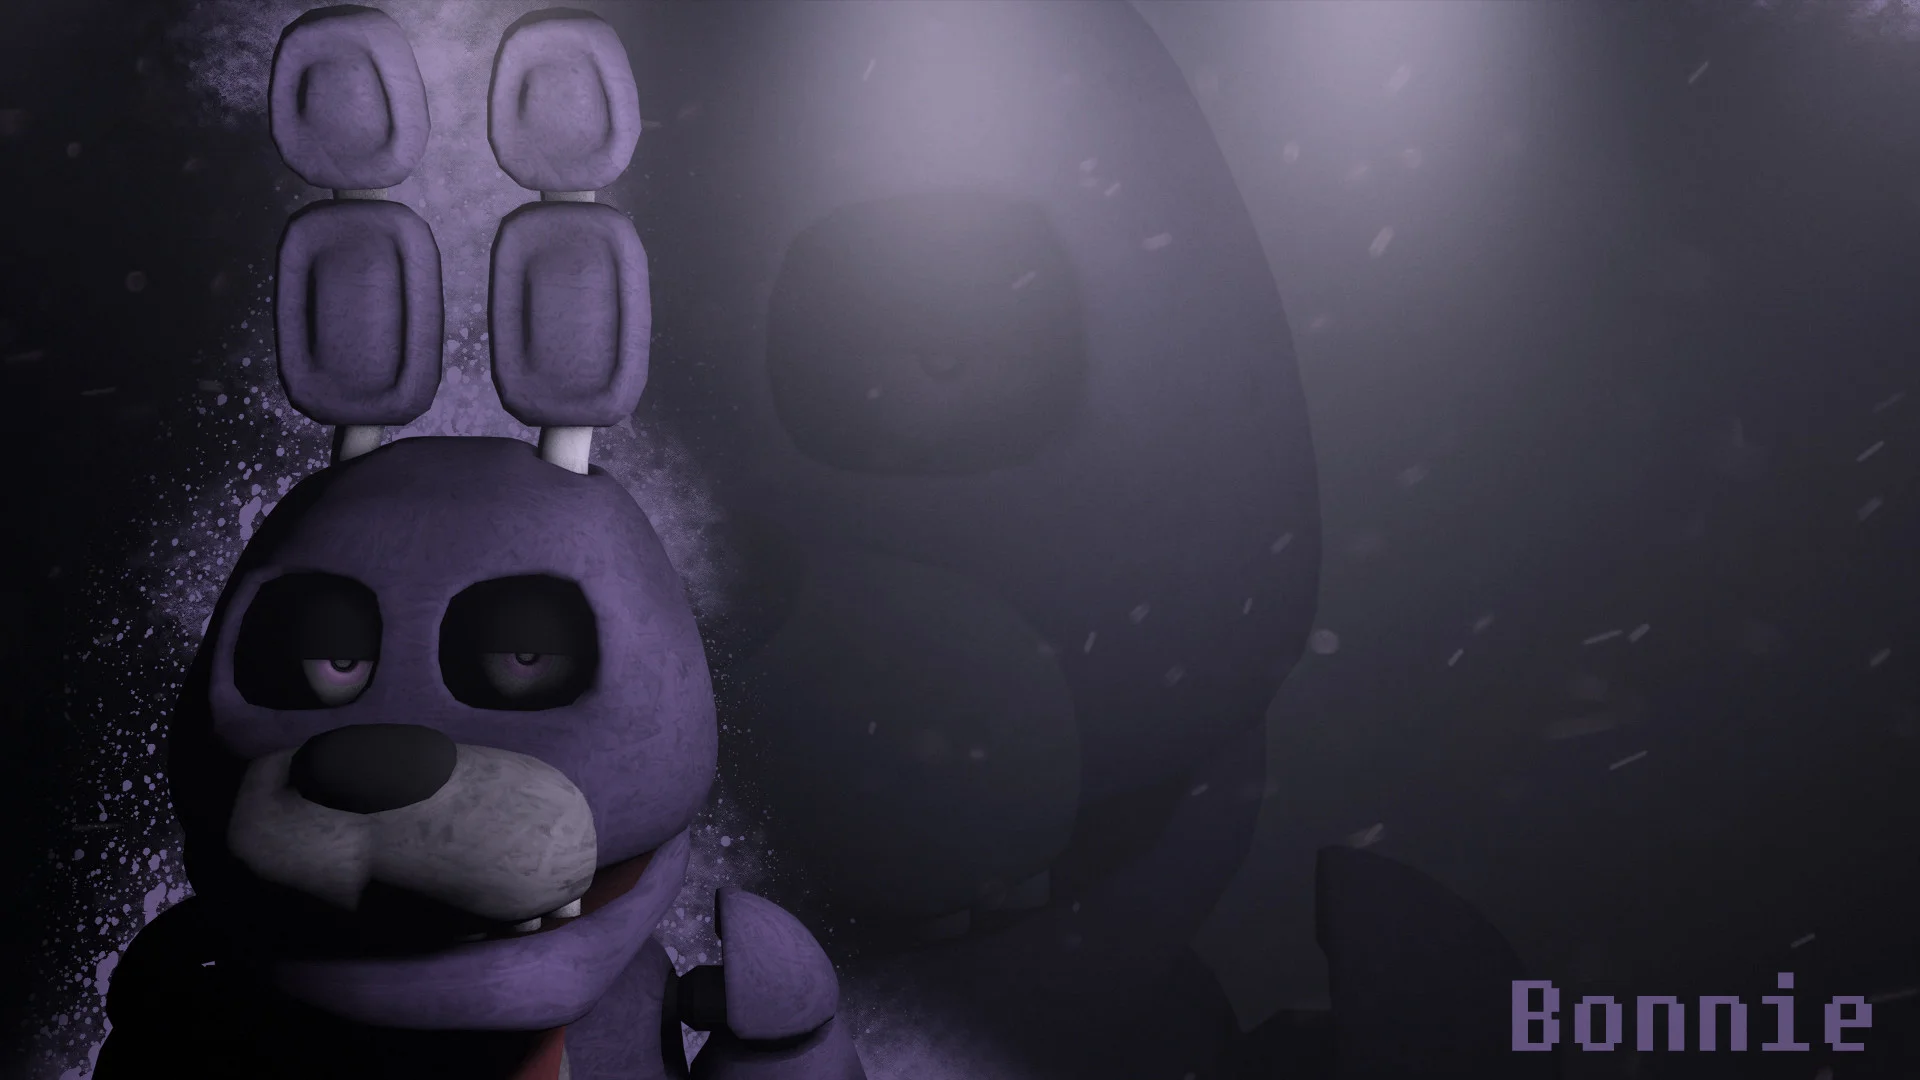 … Five Nights at Freddy's Bonnie Wallpaper DOWNLOAD by NiksonYT